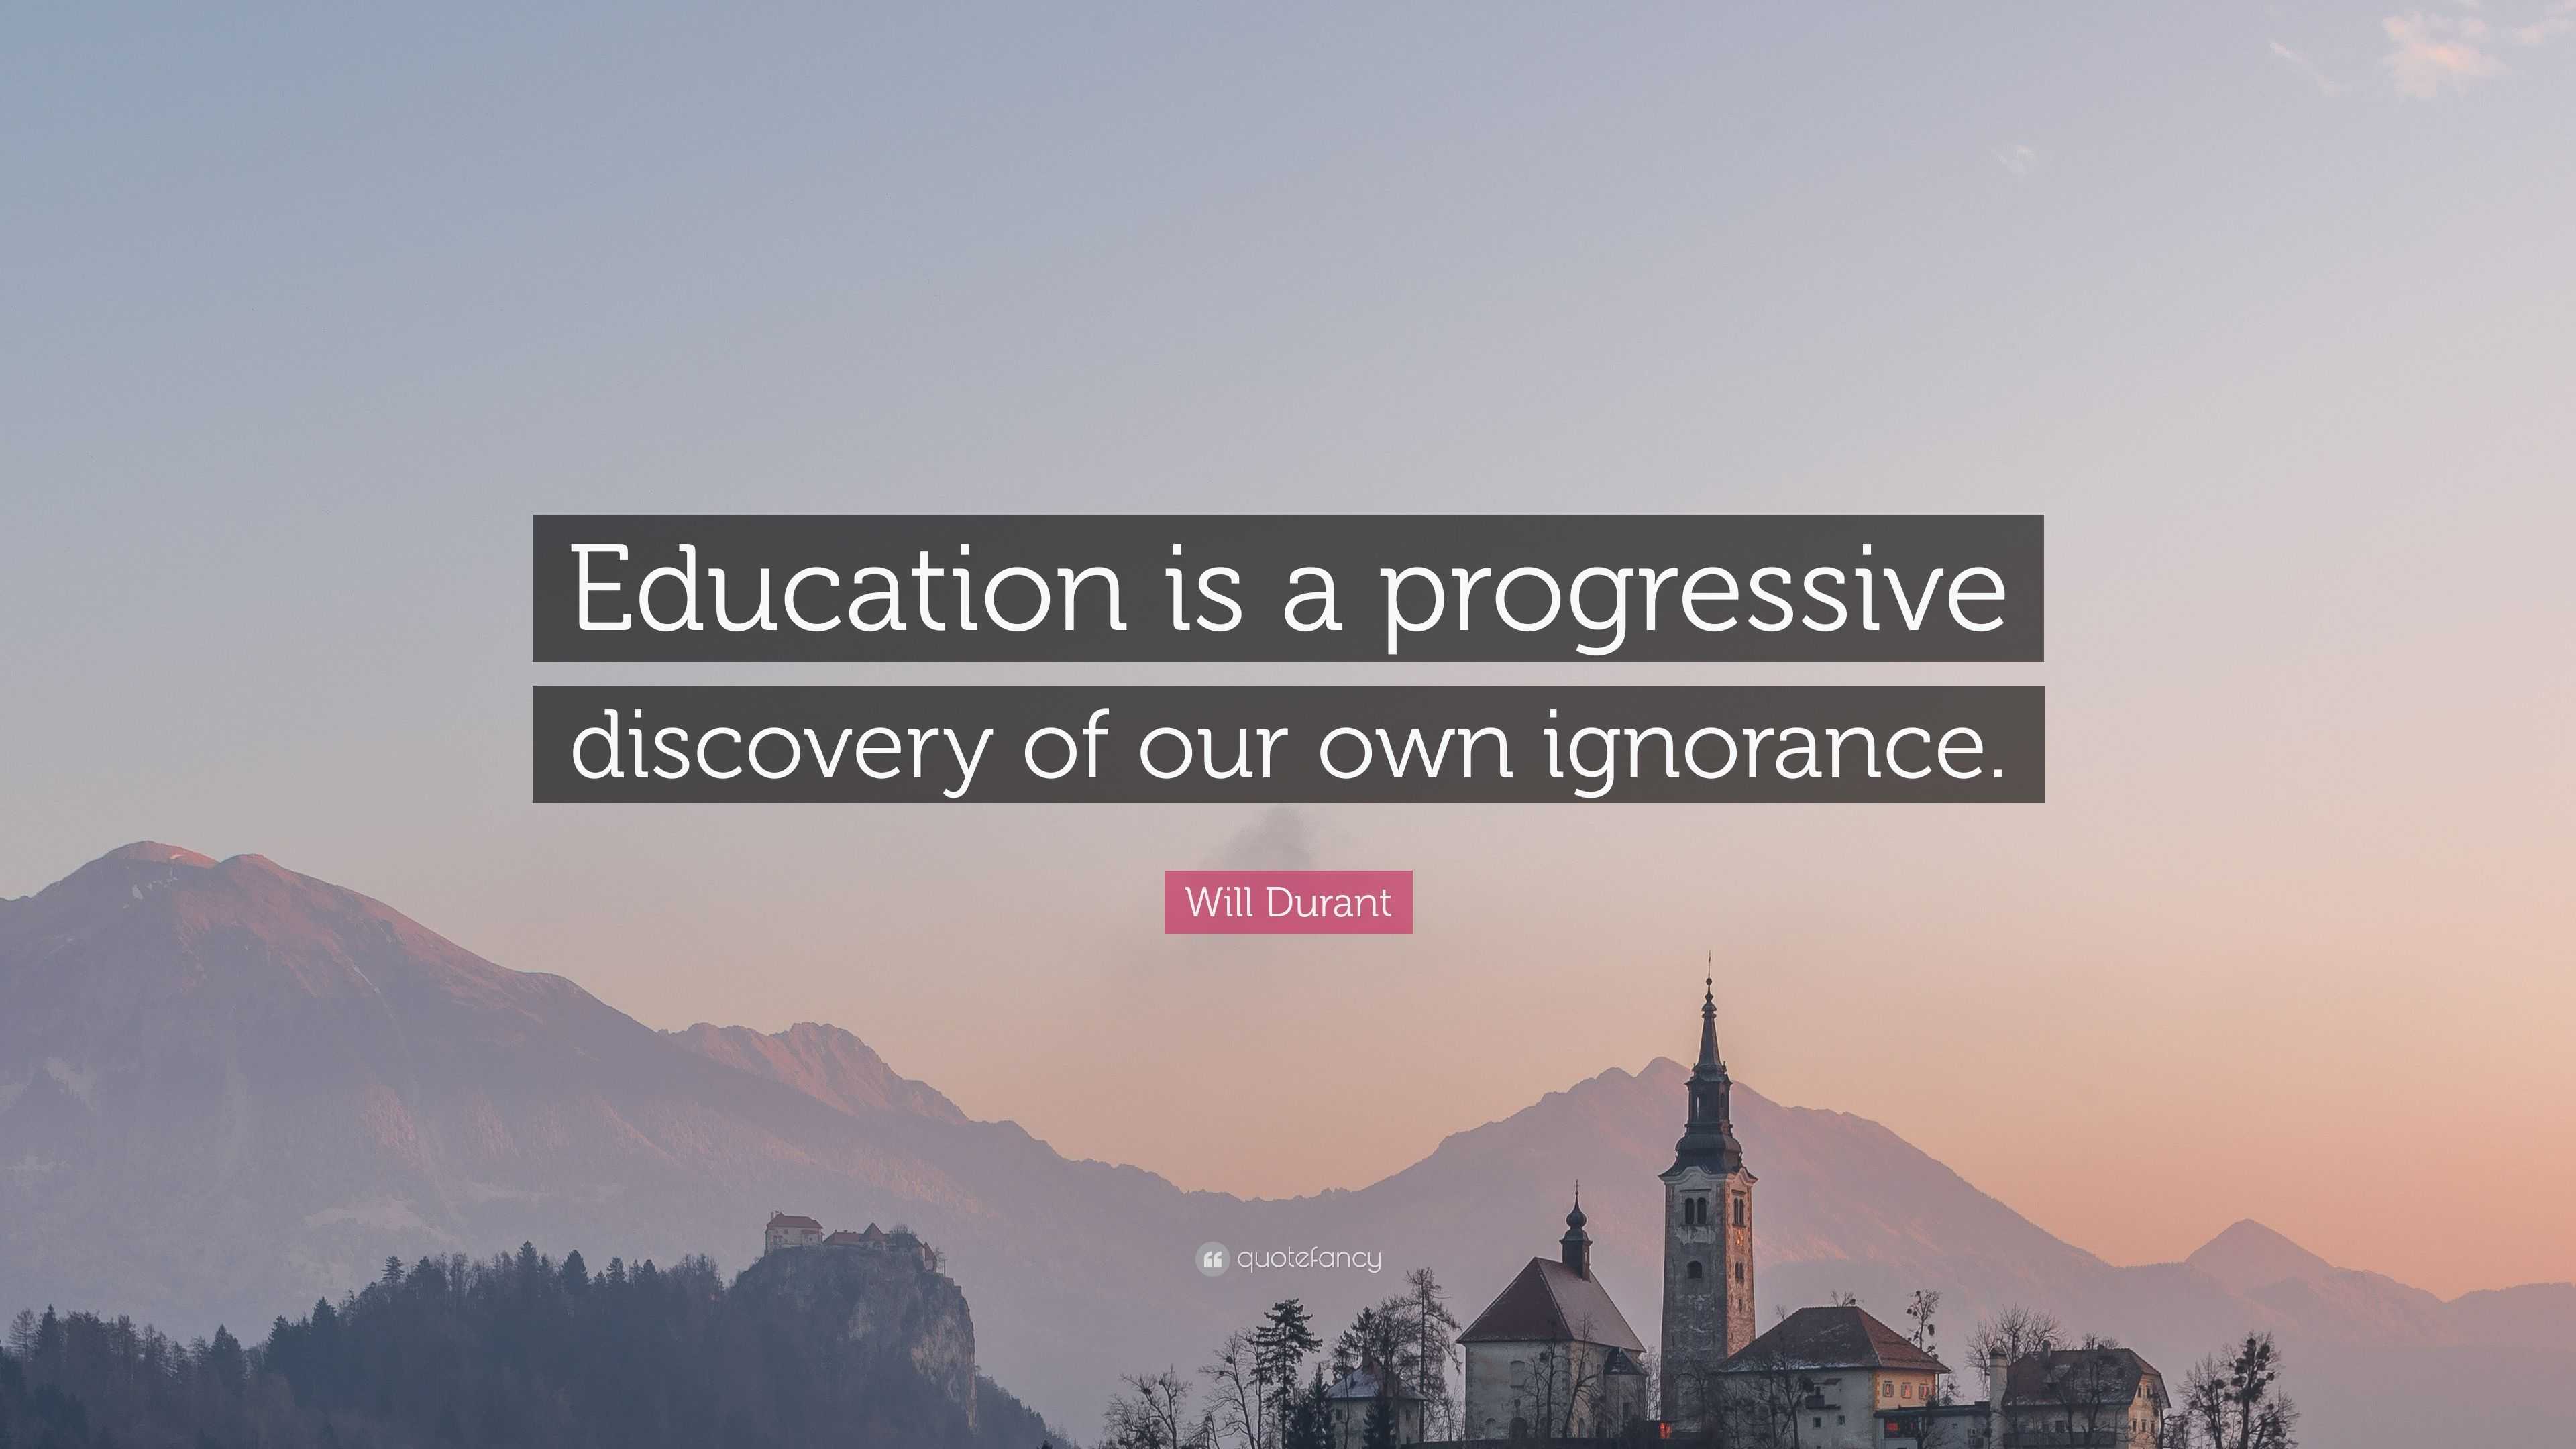 education is a progressive discovery of our ignorance